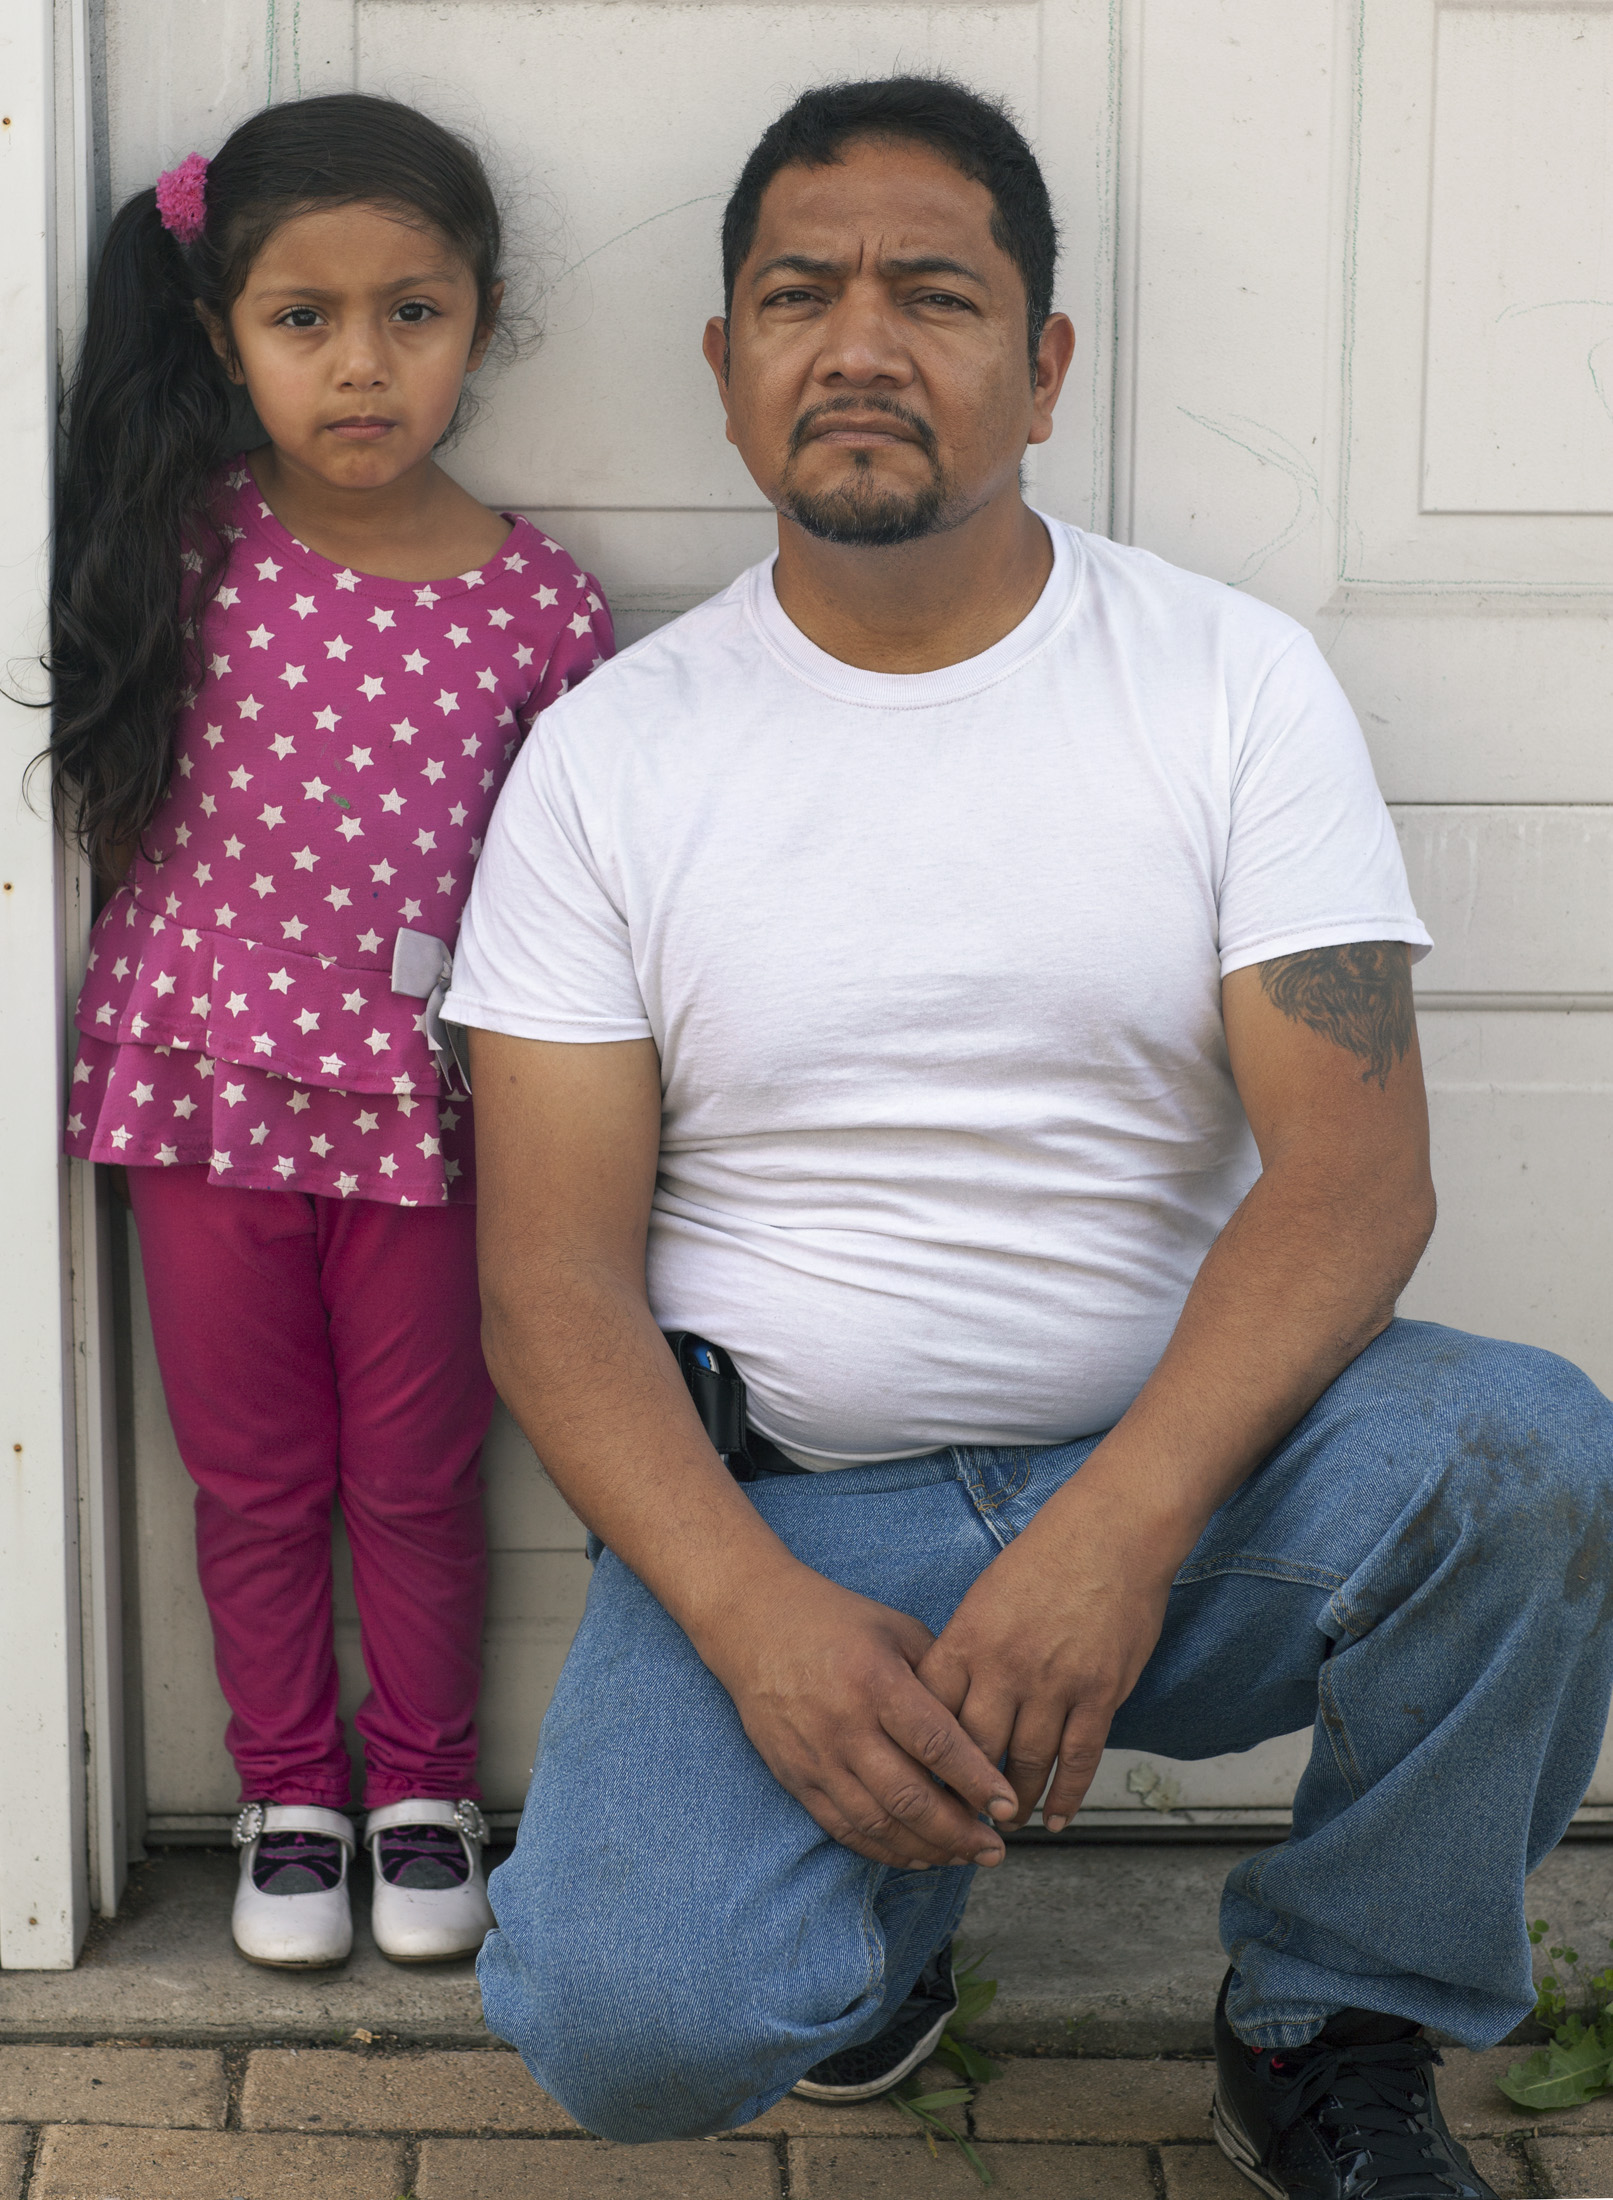 Martin Morales, activist, and his daughter, Scarlet, 2015. Terry Evans